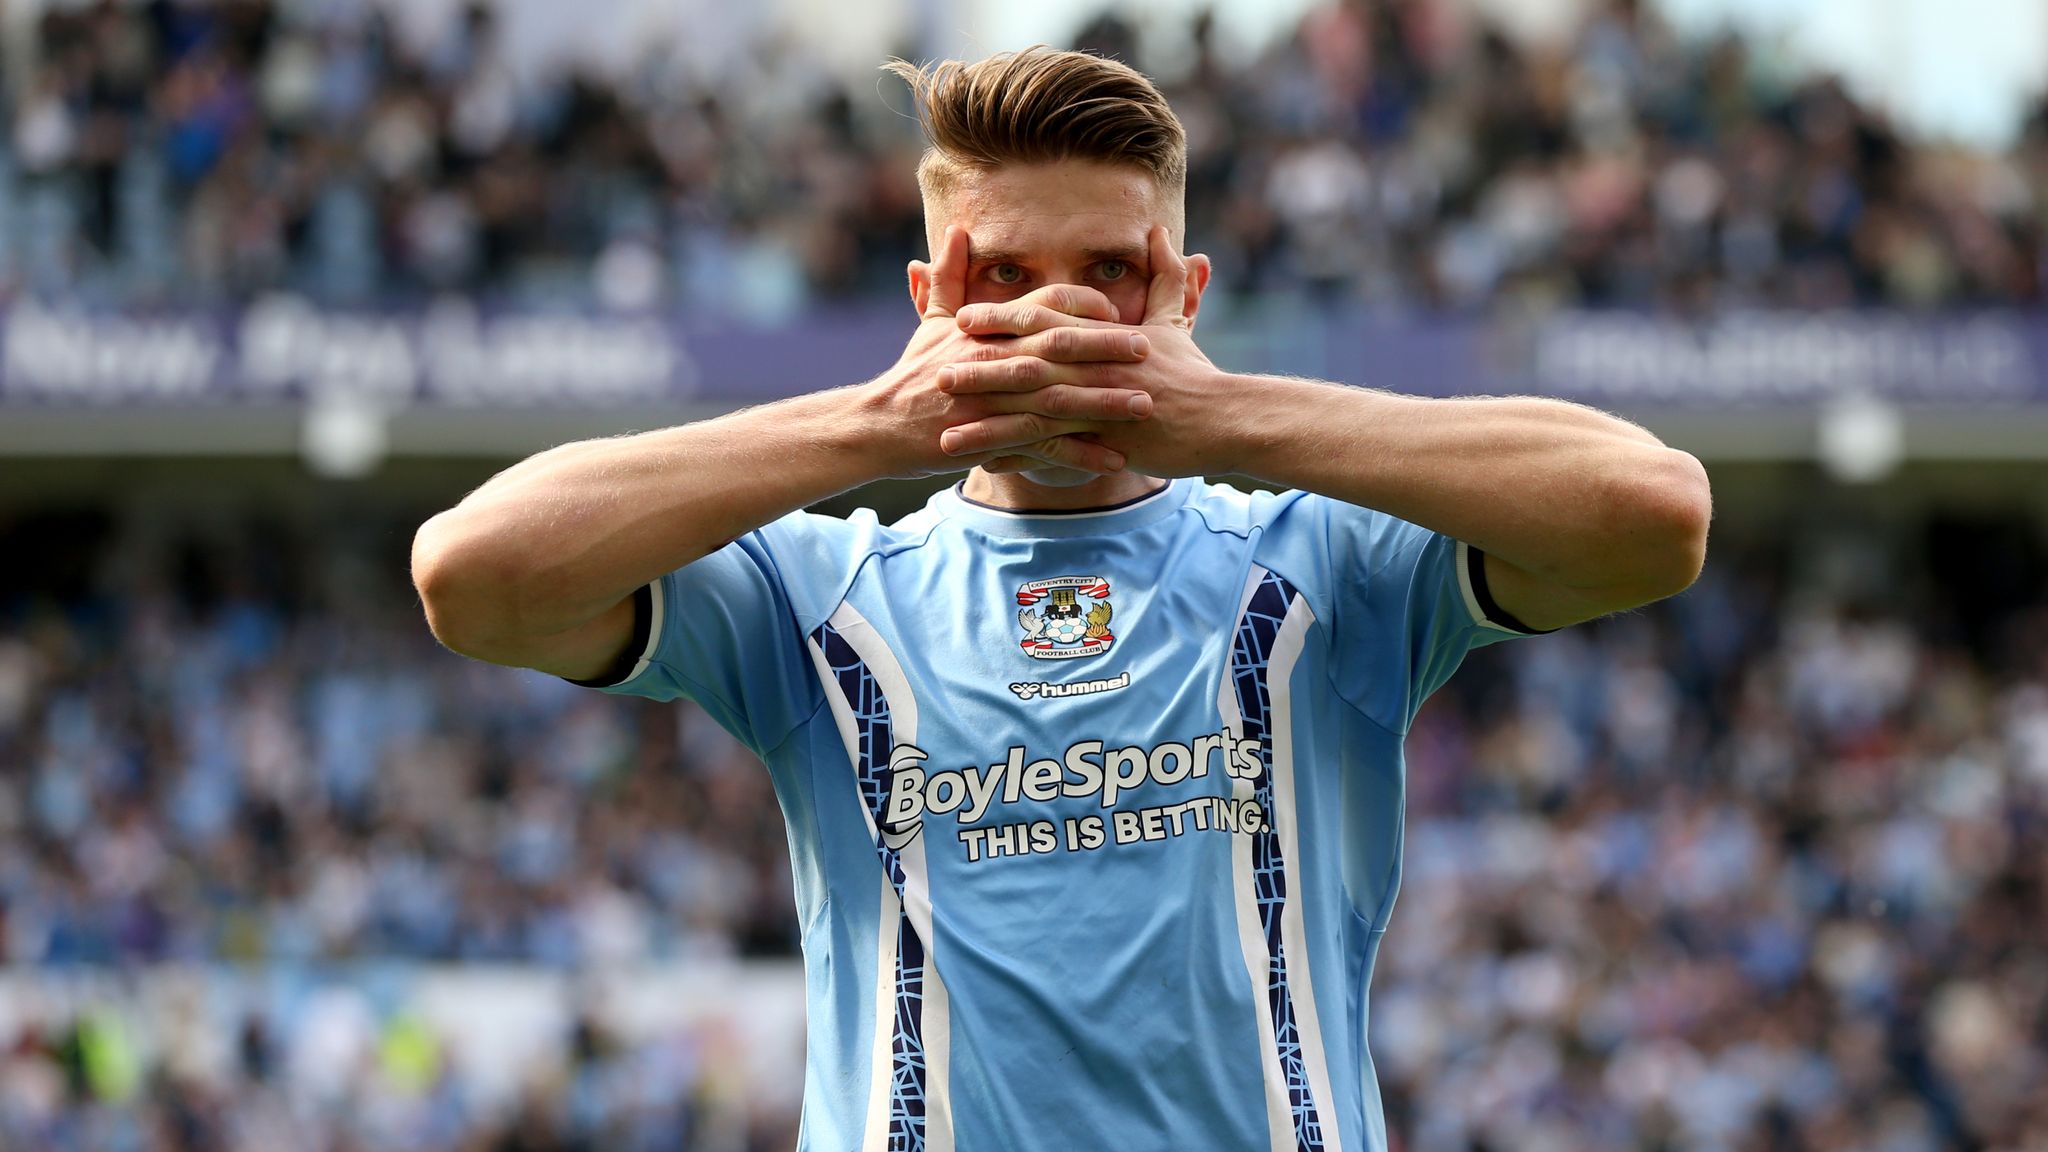  Viktor Gyokeres, a Swedish professional footballer who plays as a striker for EFL Championship club Coventry City, is pictured celebrating a goal with his hands covering his face.